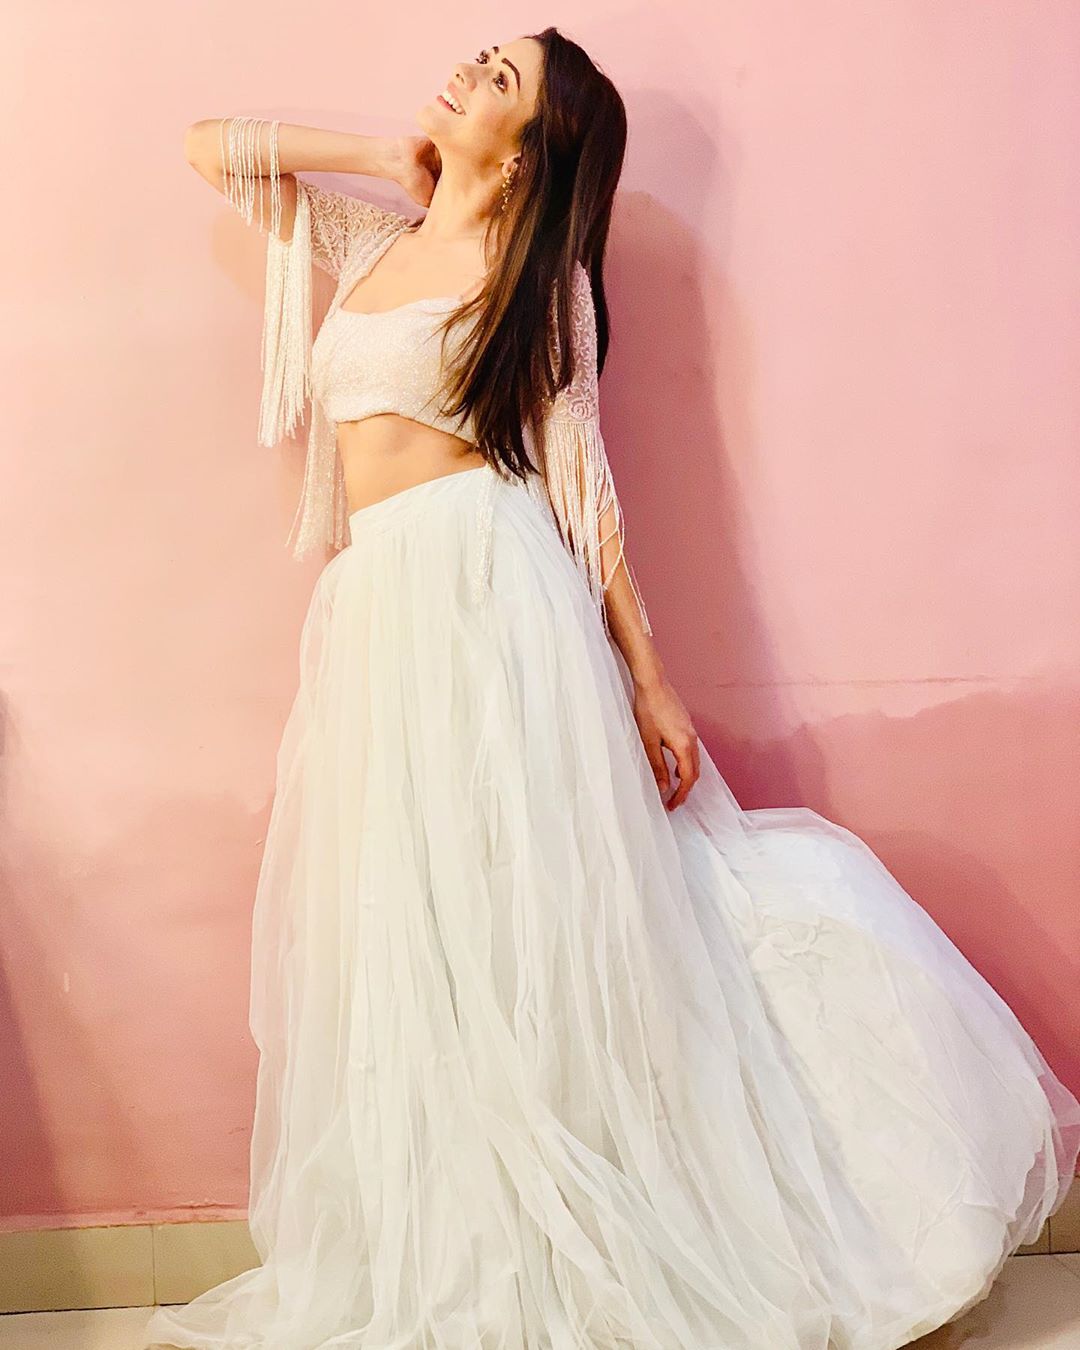 Hiba Nawab Oozing Sex Appeal In A Sexy White Dress image pic